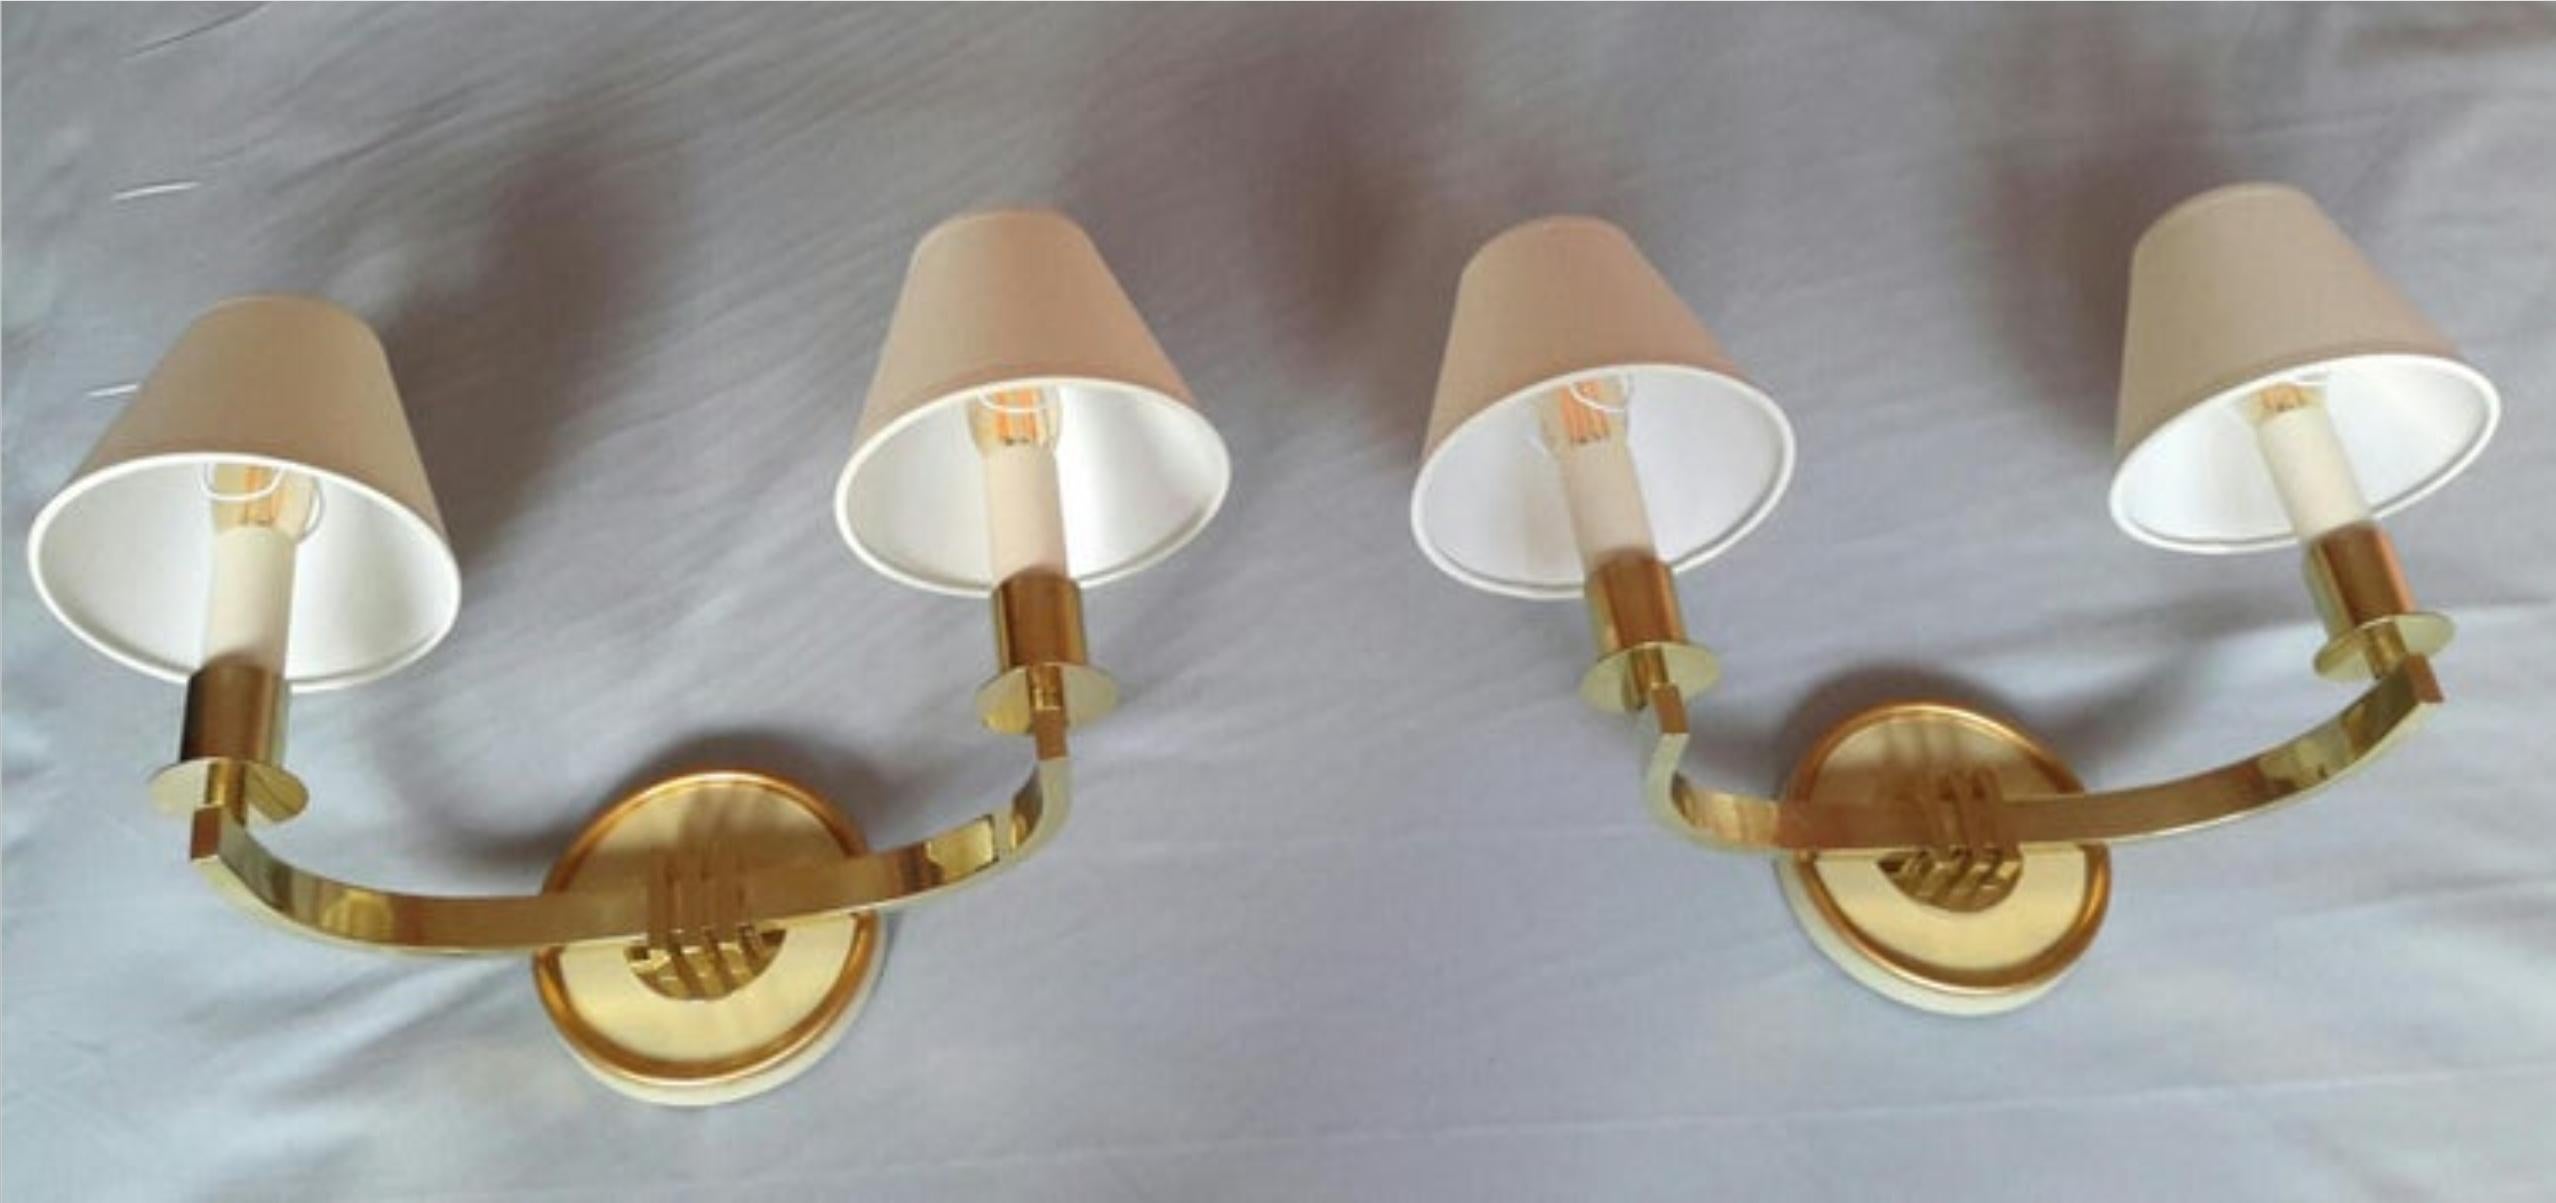 Mid-20th Century Pair of French Mid-Century Modern Gilt Bronze Wall Sconces, 1950's For Sale